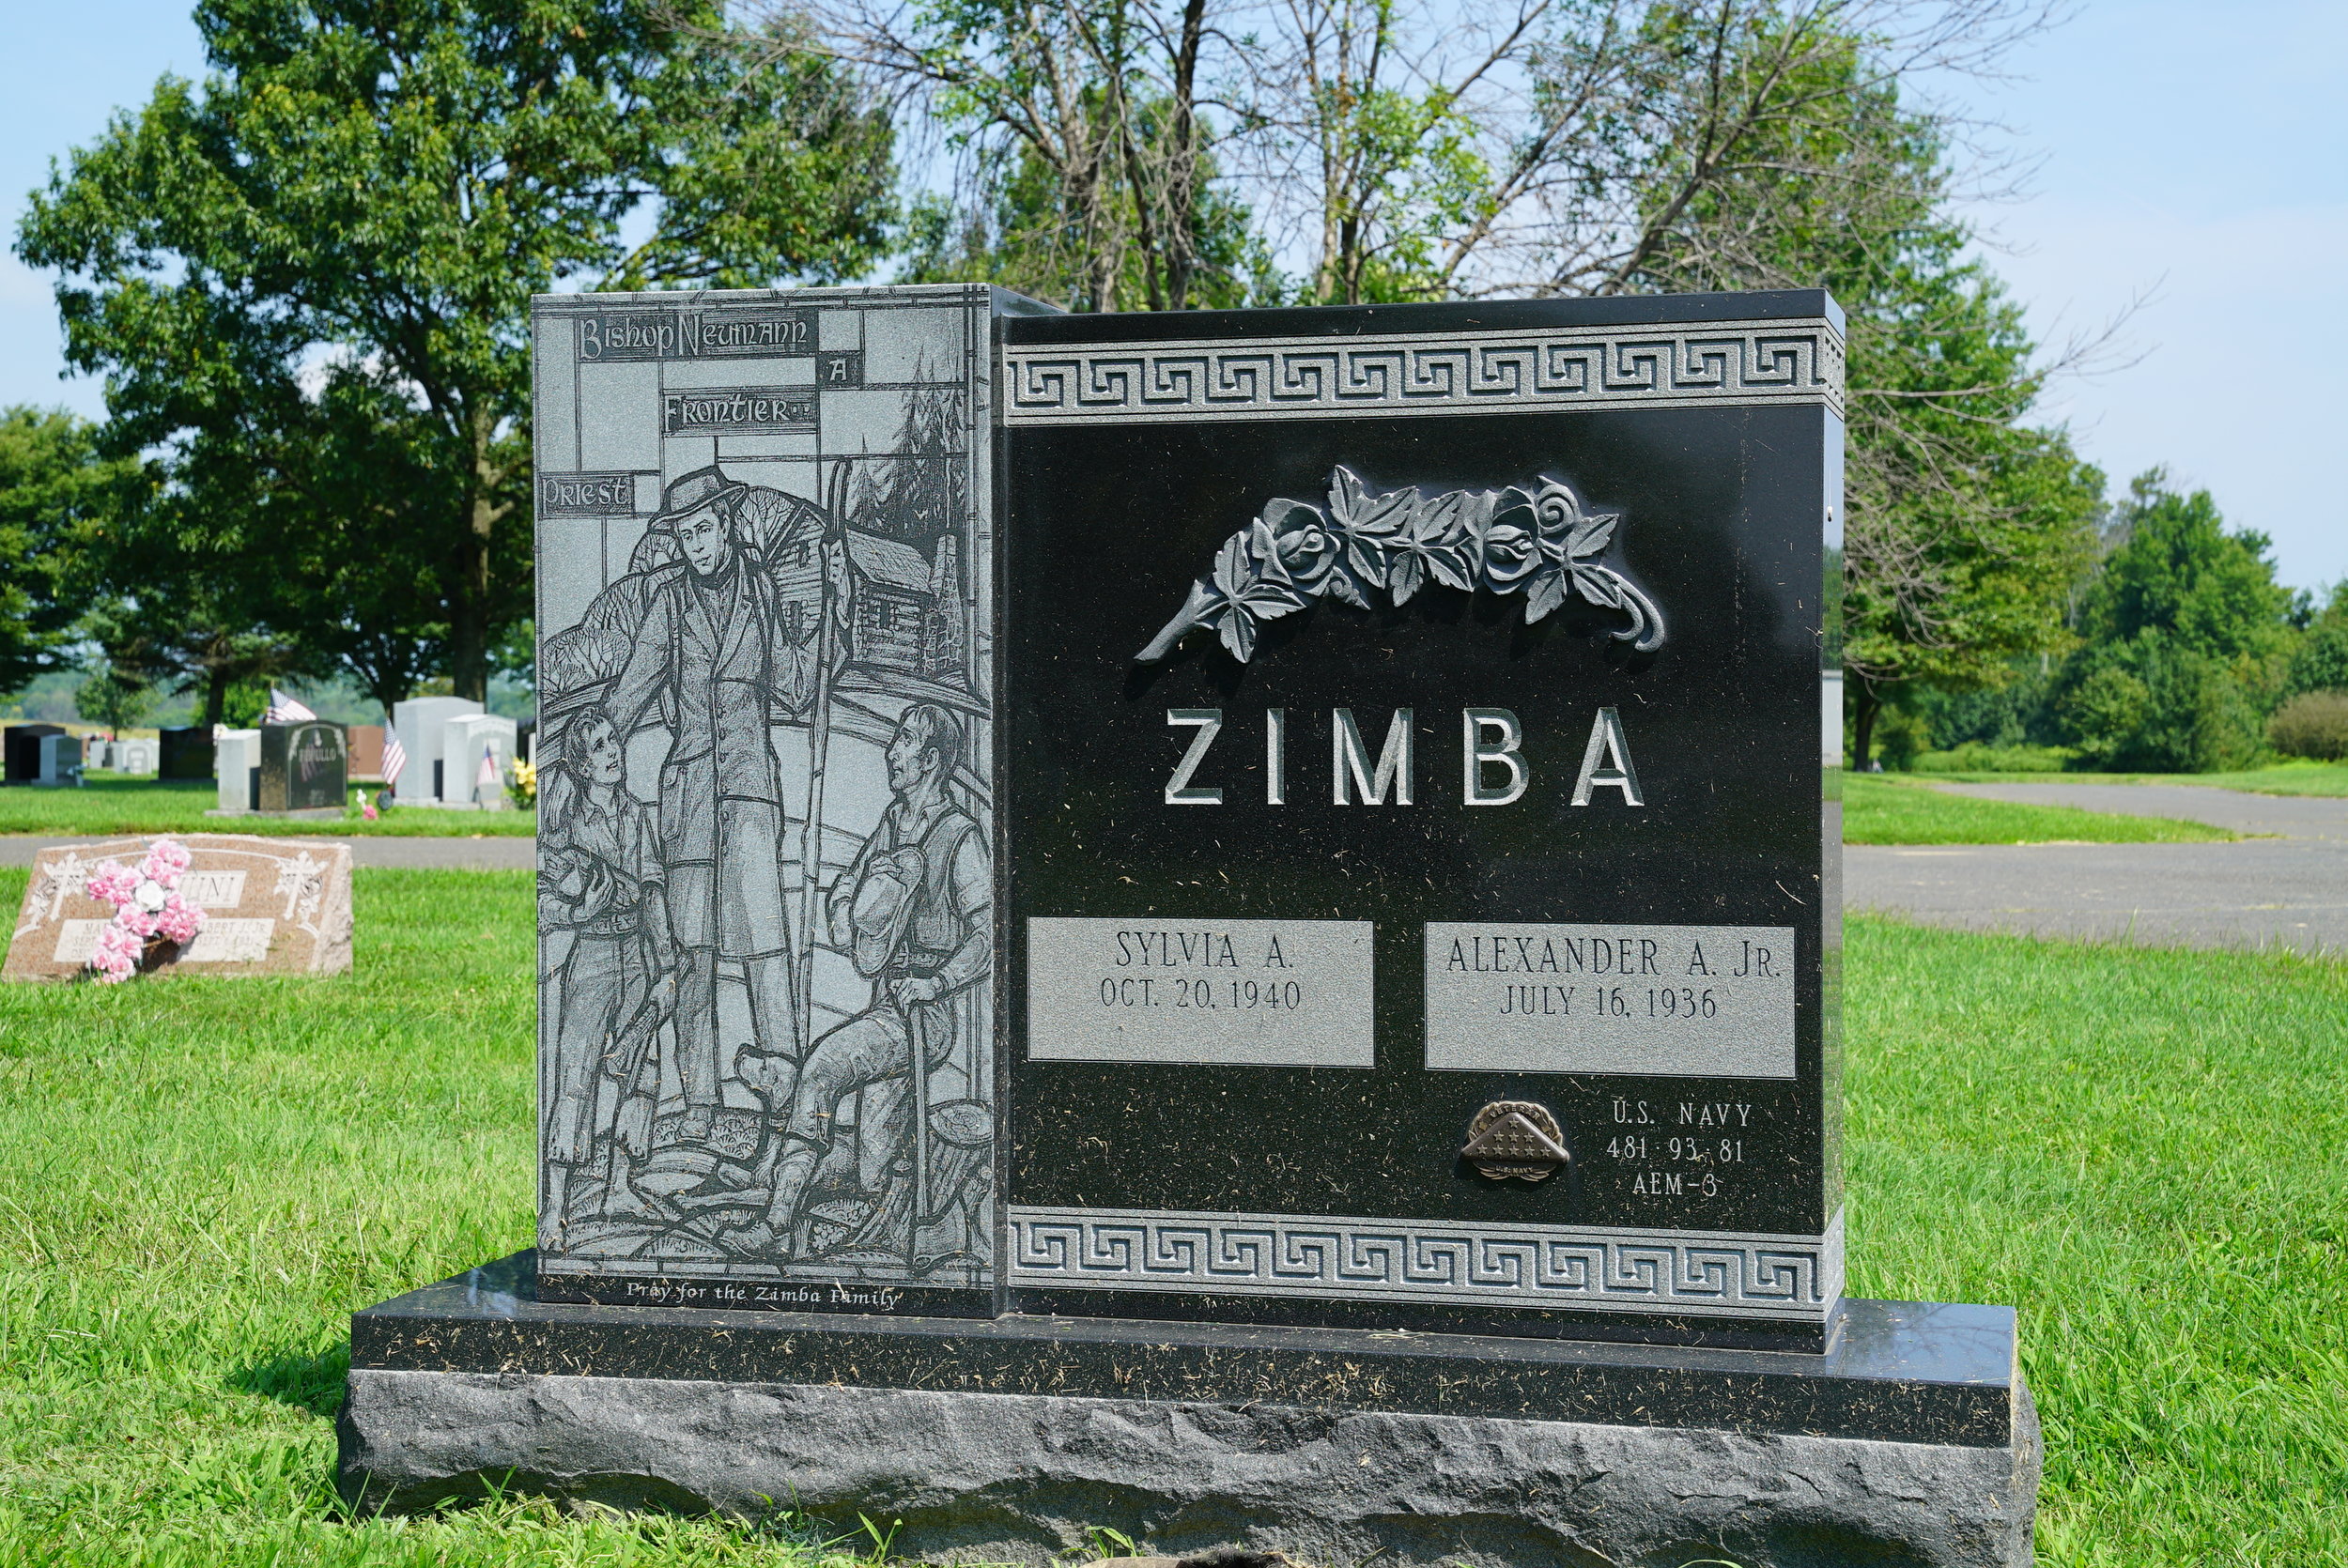  The Zimba stone has a bronze veteran medallion. They are provided free by the Department of Veterans Affairs. 